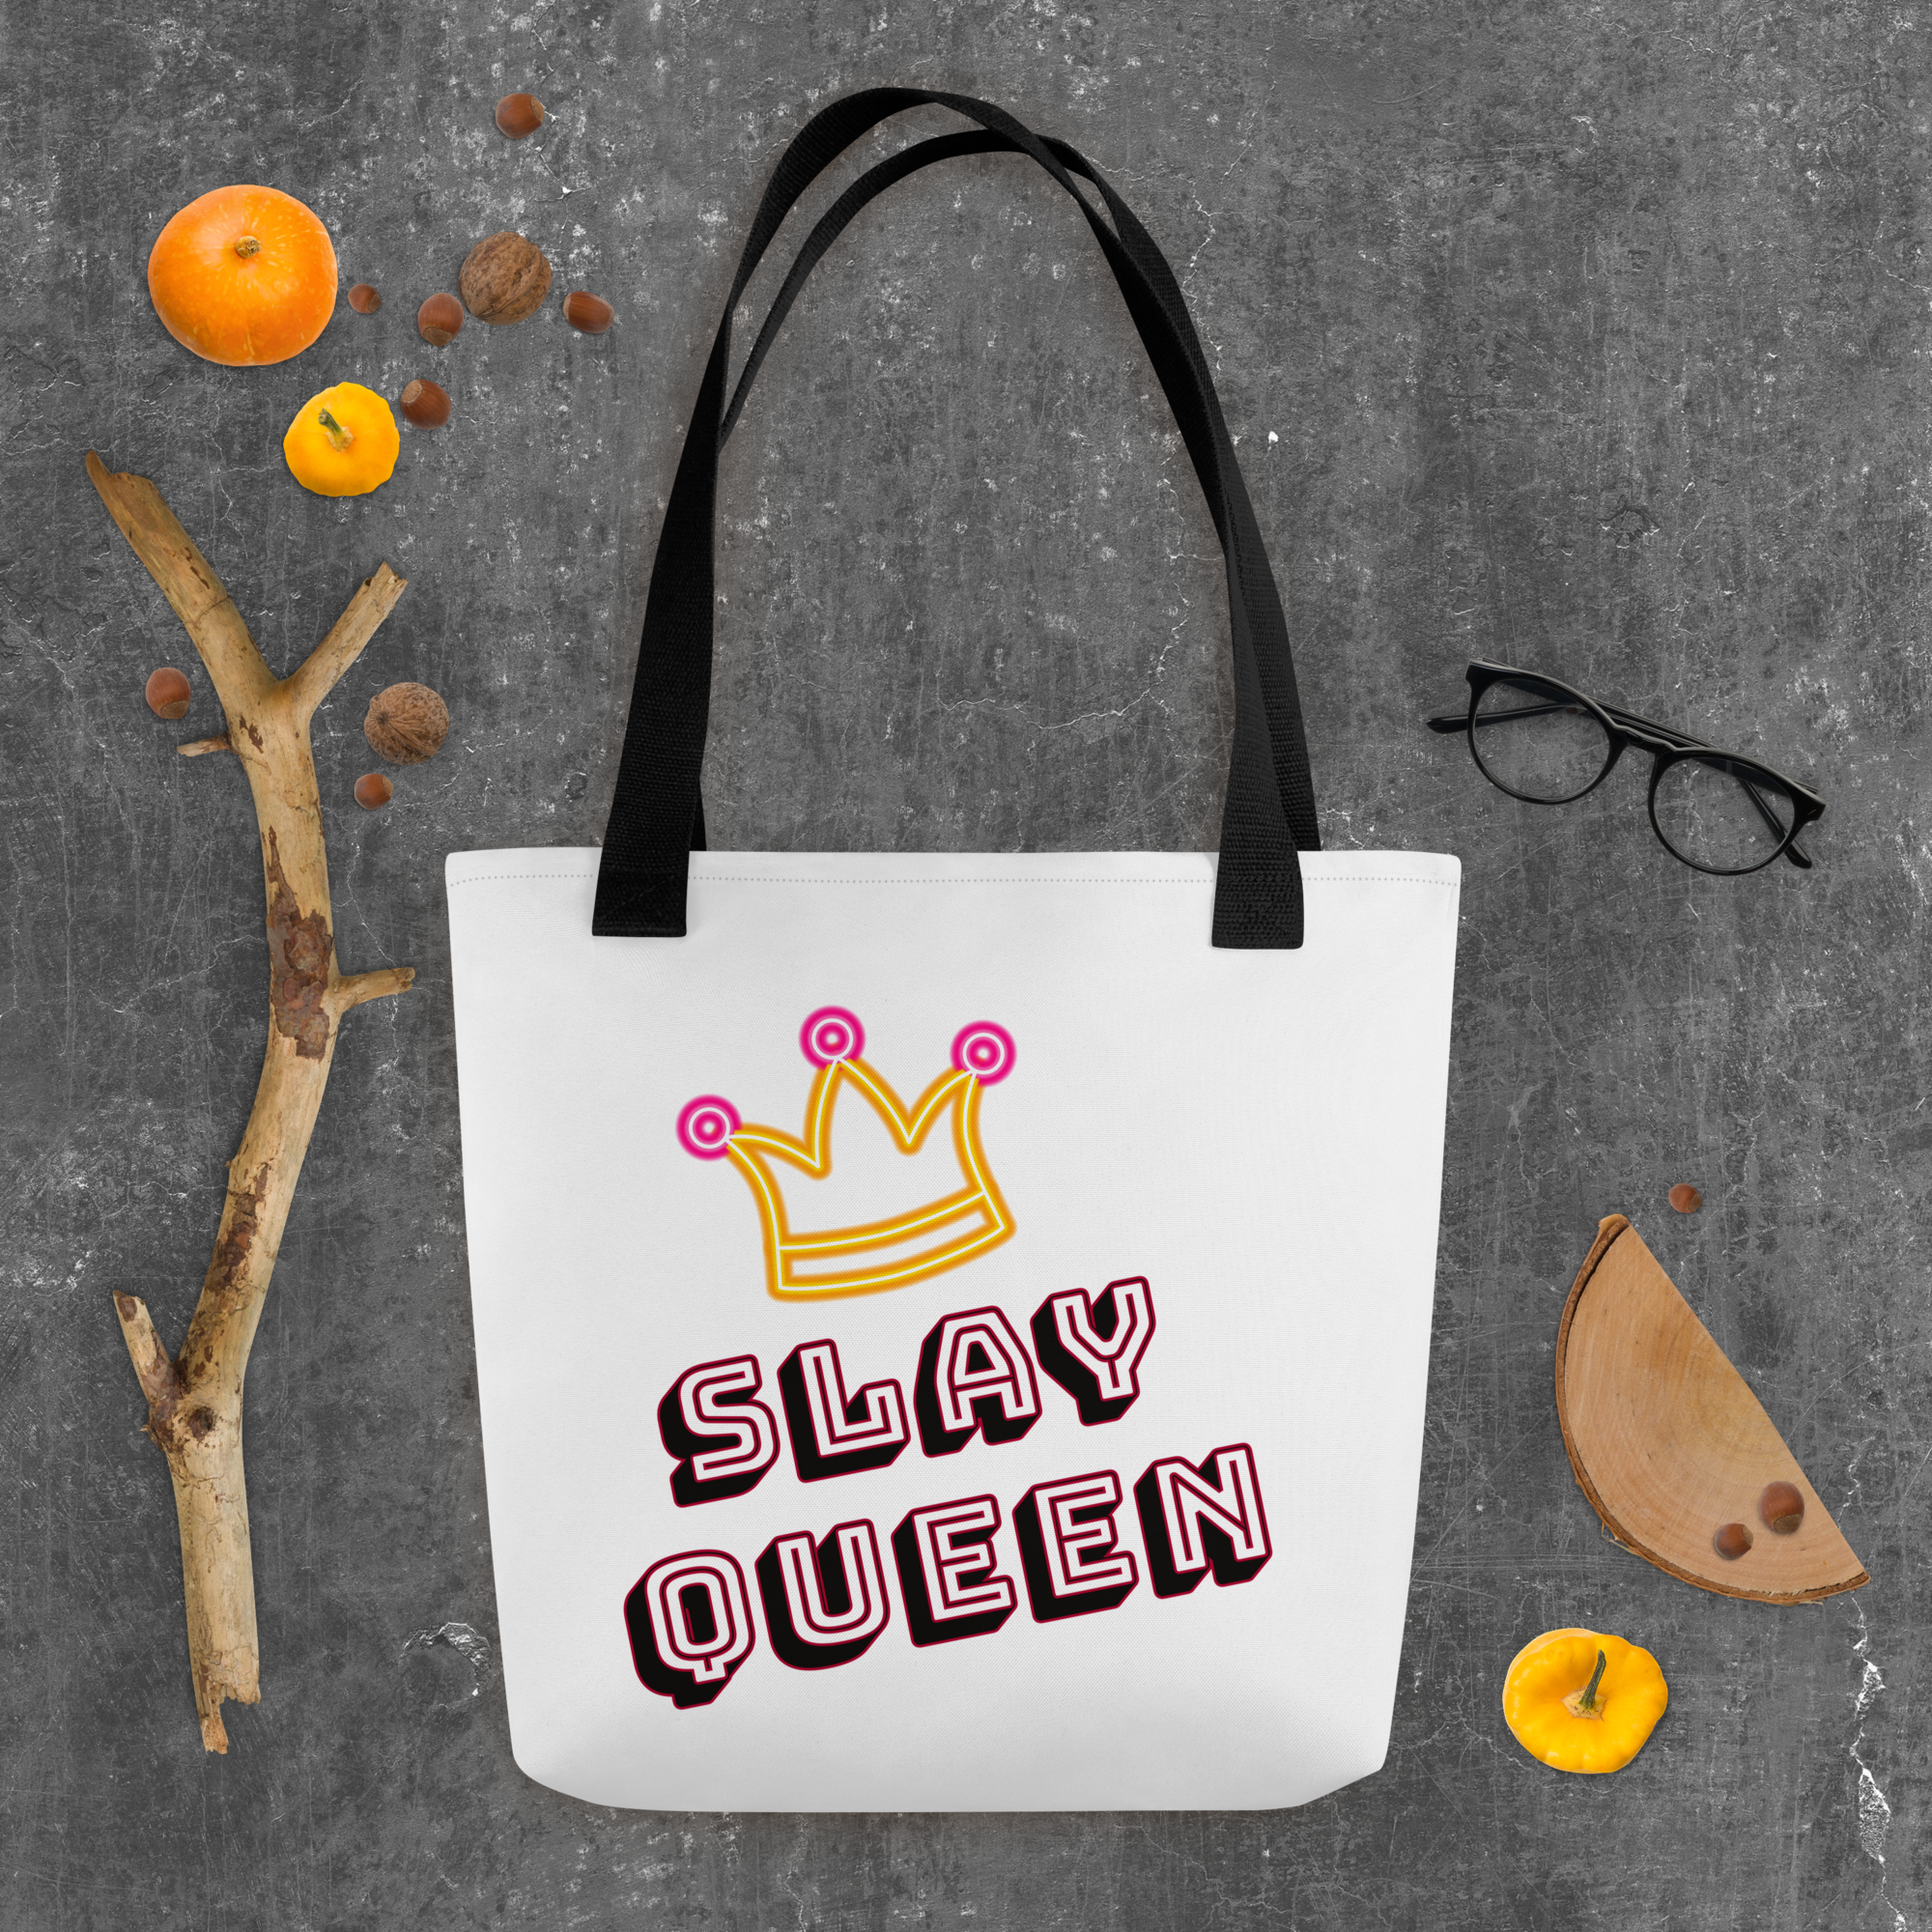 Slay Queen White Tote bag